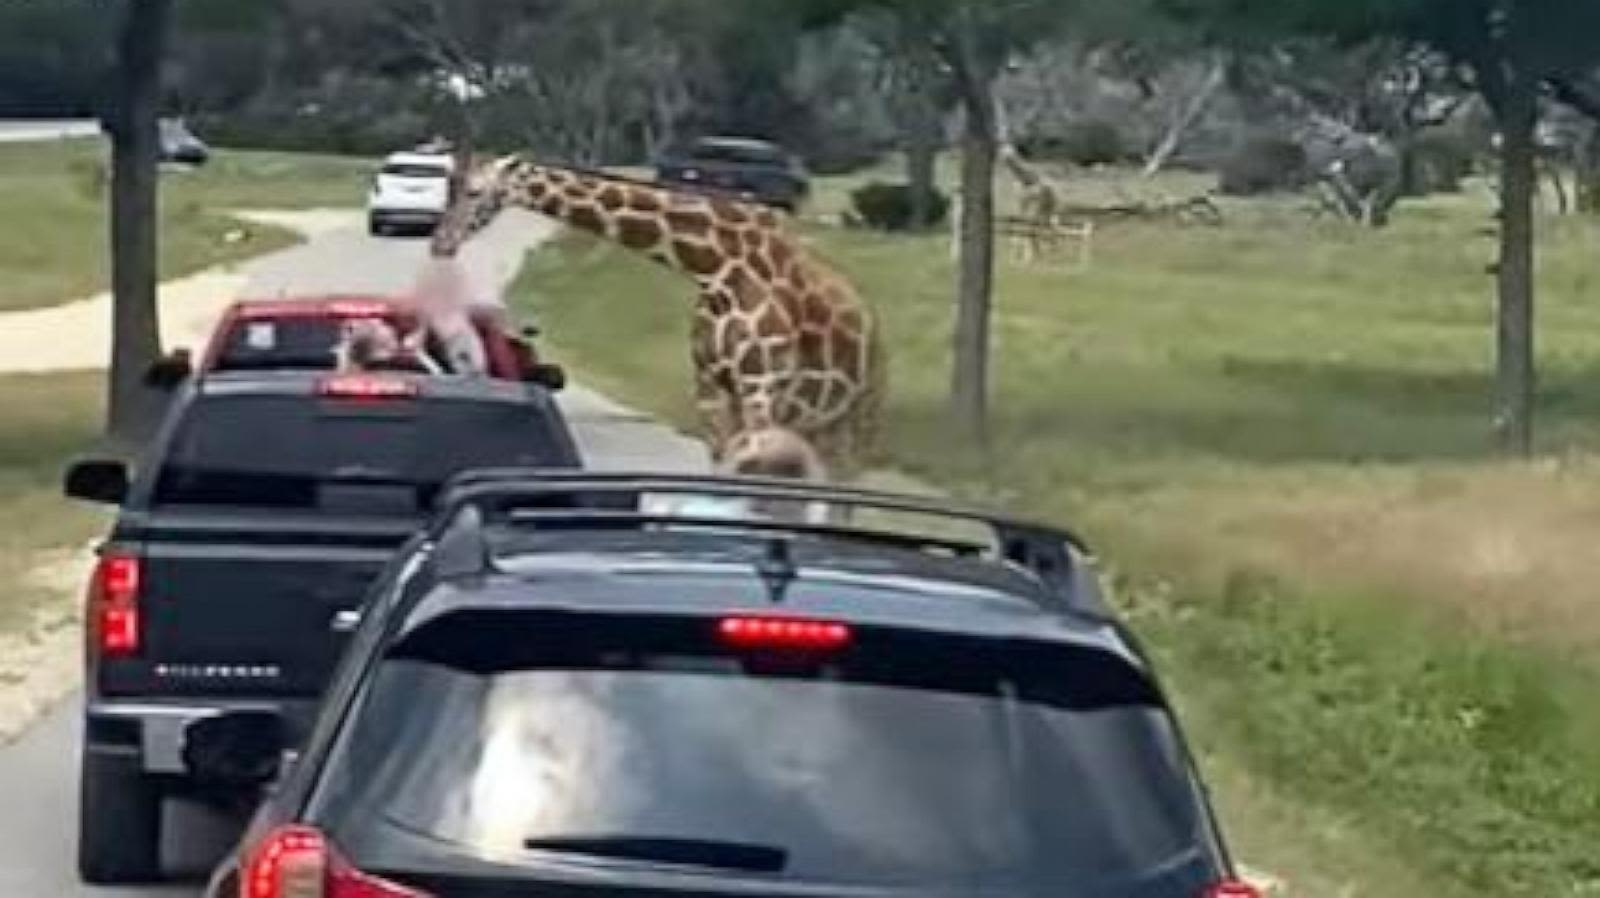 Family speaks out after giraffe picks up toddler in heart-stopping video